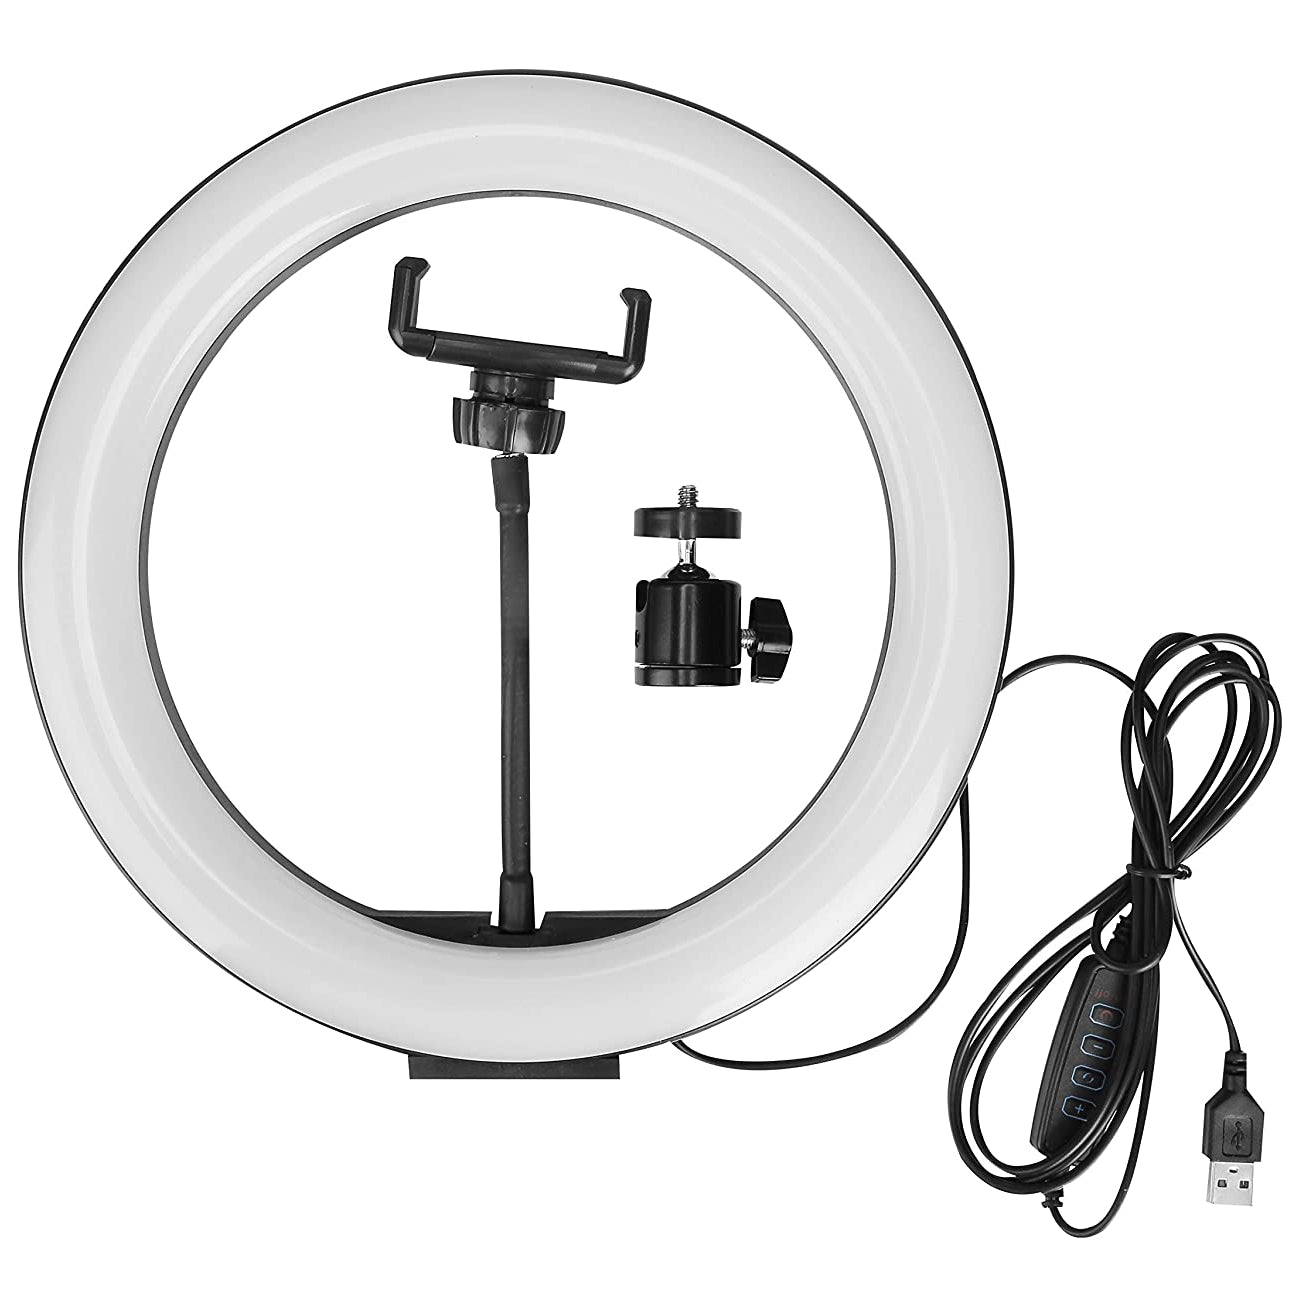 Photron Professional 12 Inch LED Ring Light with Mobile Holder PH12RL - The Camerashop